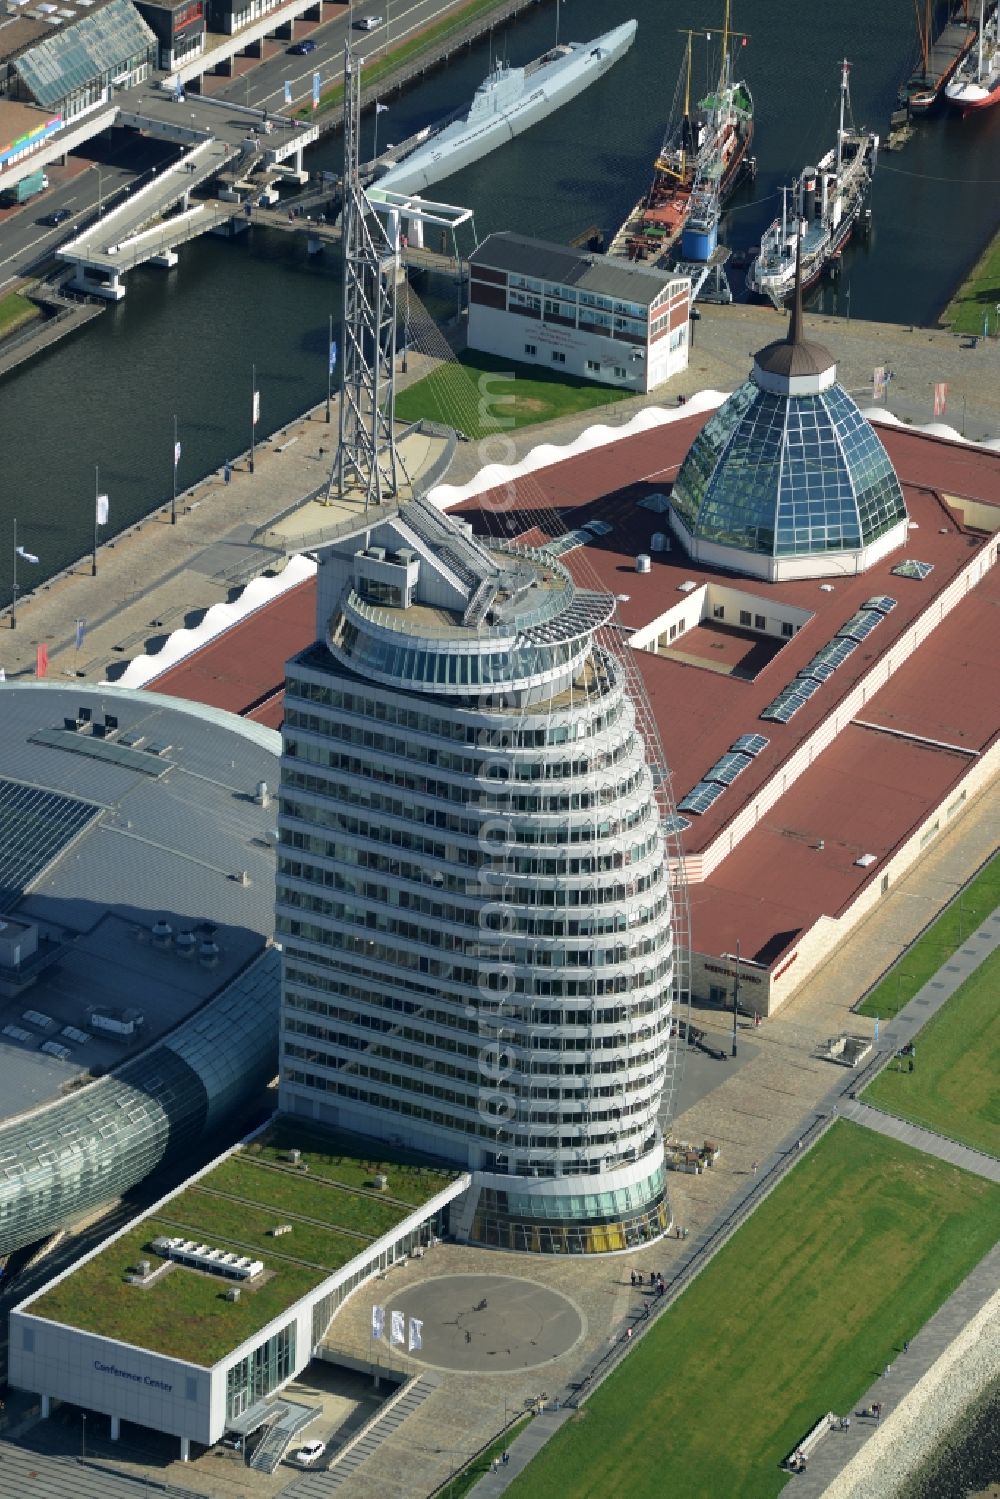 Bremerhaven from the bird's eye view: Atlantic Hotel Sail City and Klimahaus in Bremerhaven in the state of Bremen. The four star hotel with its bent front is located adjacent to the exhibition space of Klimahaus Bremerhaven 8° Ost and on the riverbank of the Weser